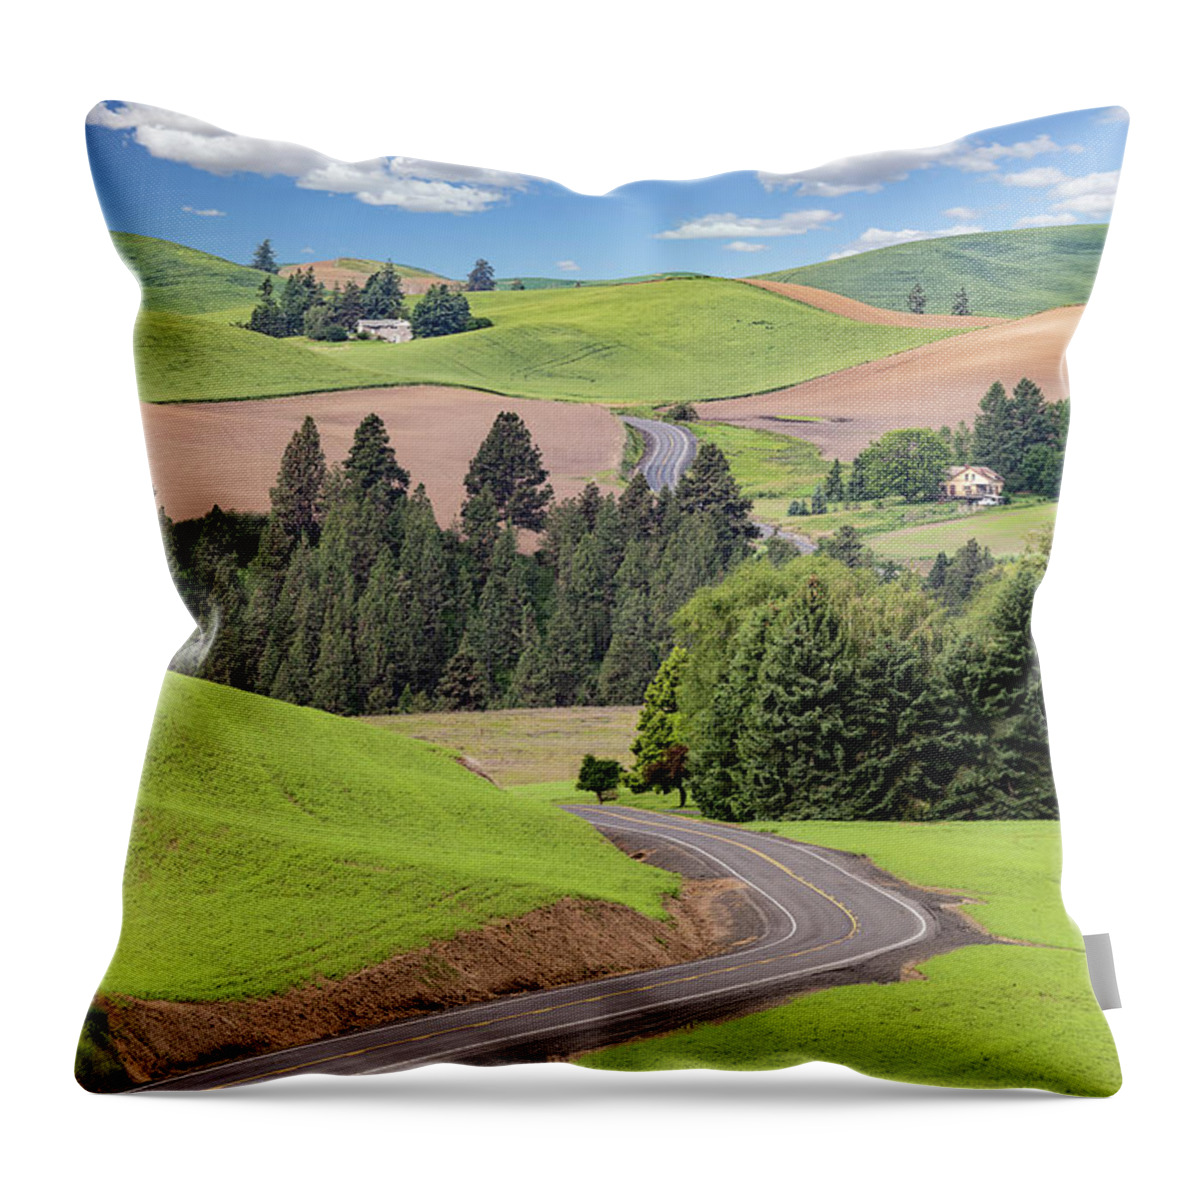 Agricultural Throw Pillow featuring the photograph The Highway by Manpreet Sokhi